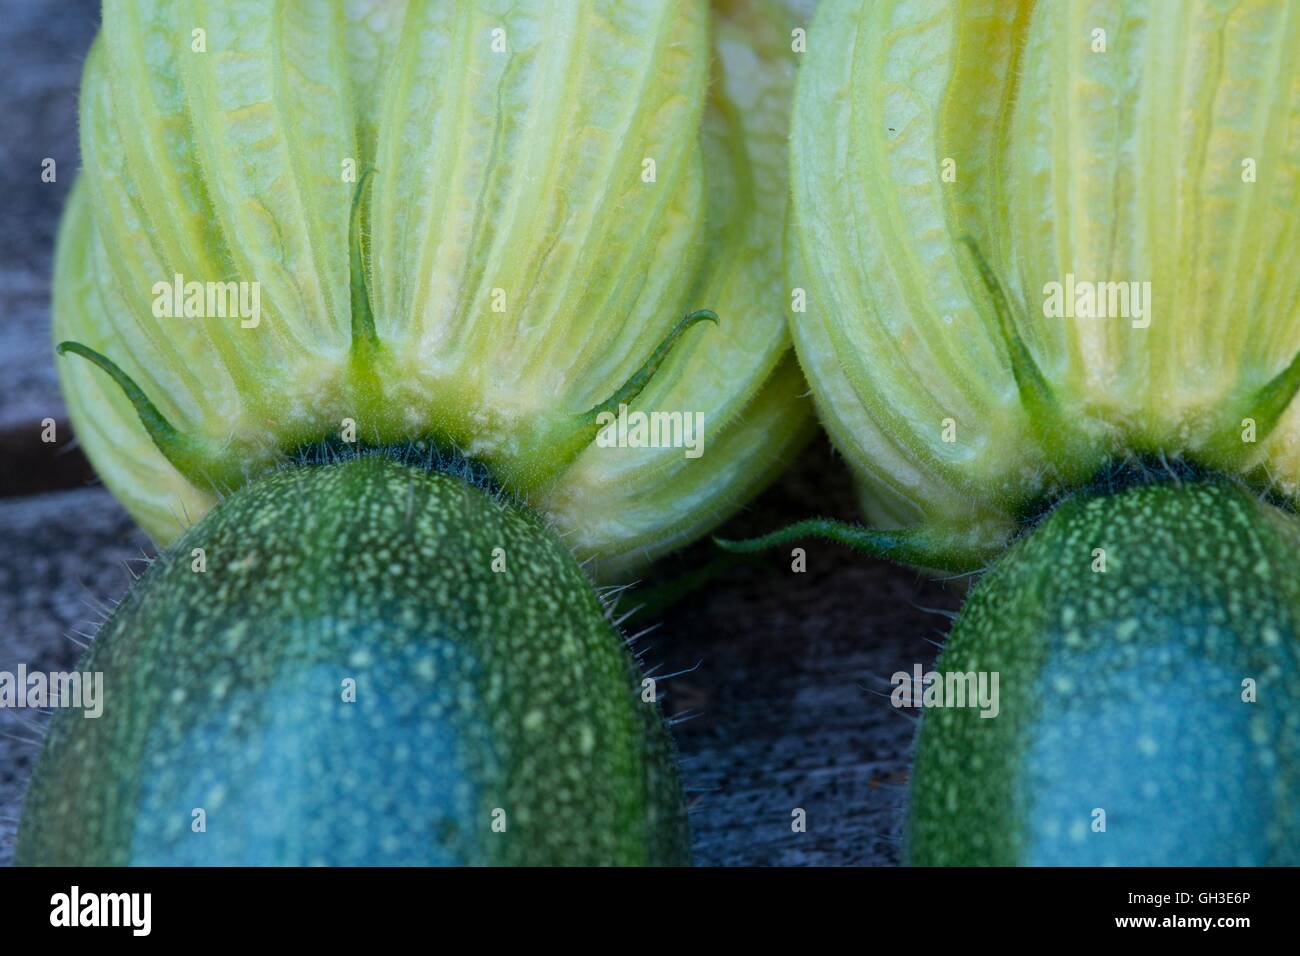 Courgette ou courgettes, Close up of flowers, Norfolk, Angleterre, juillet. Banque D'Images